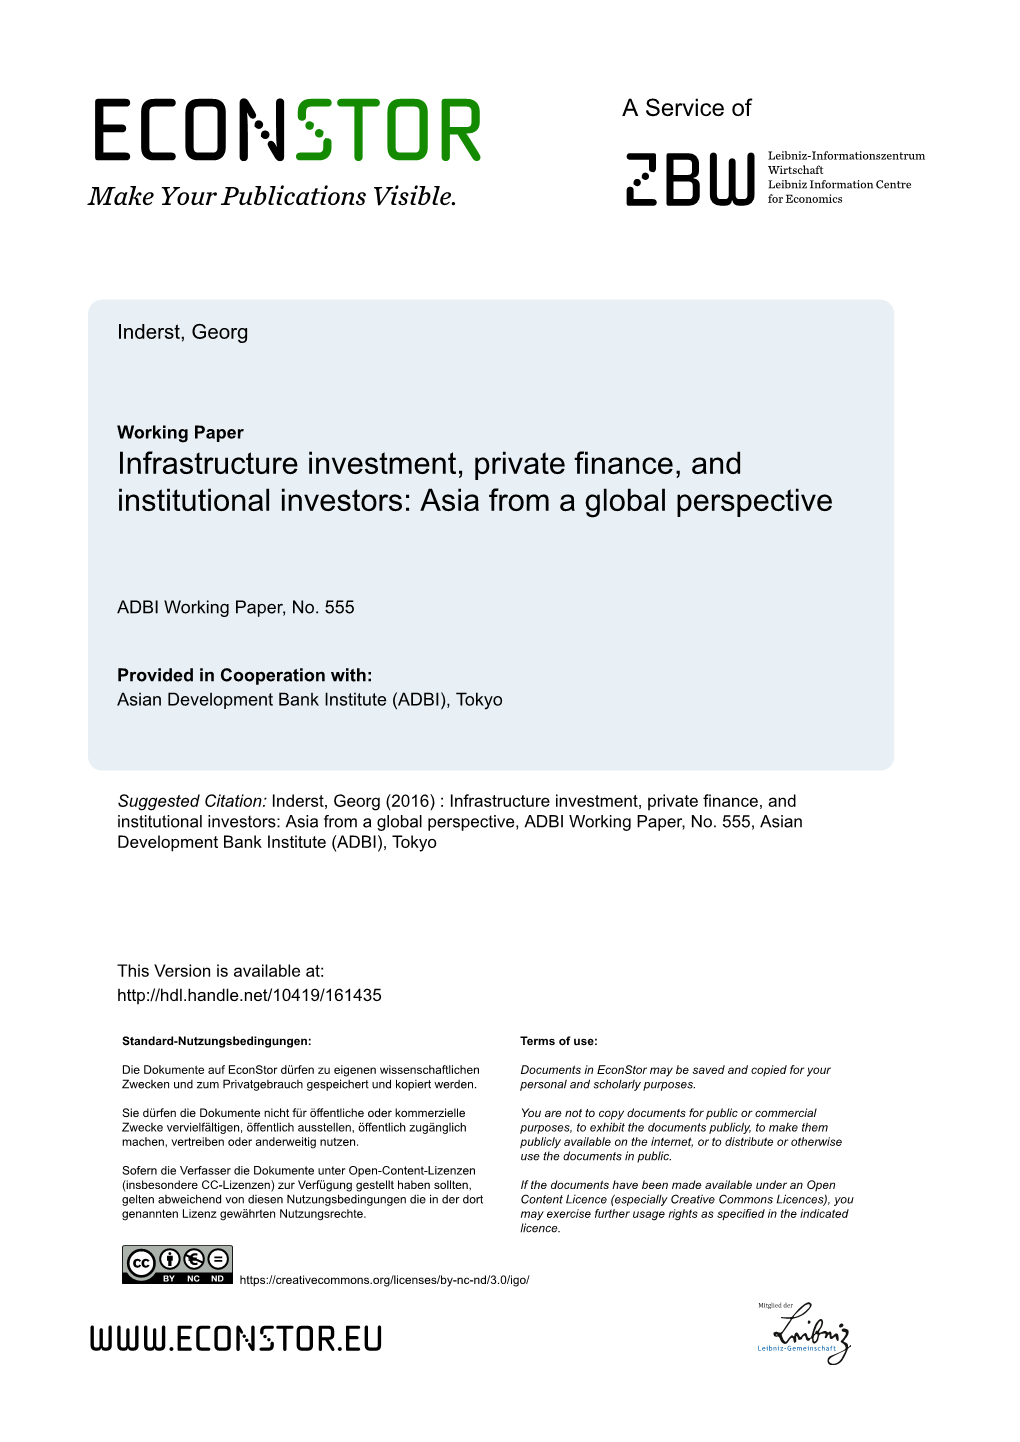 Infrastructure Investment, Private Finance, and Institutional Investors: Asia from a Global Perspective